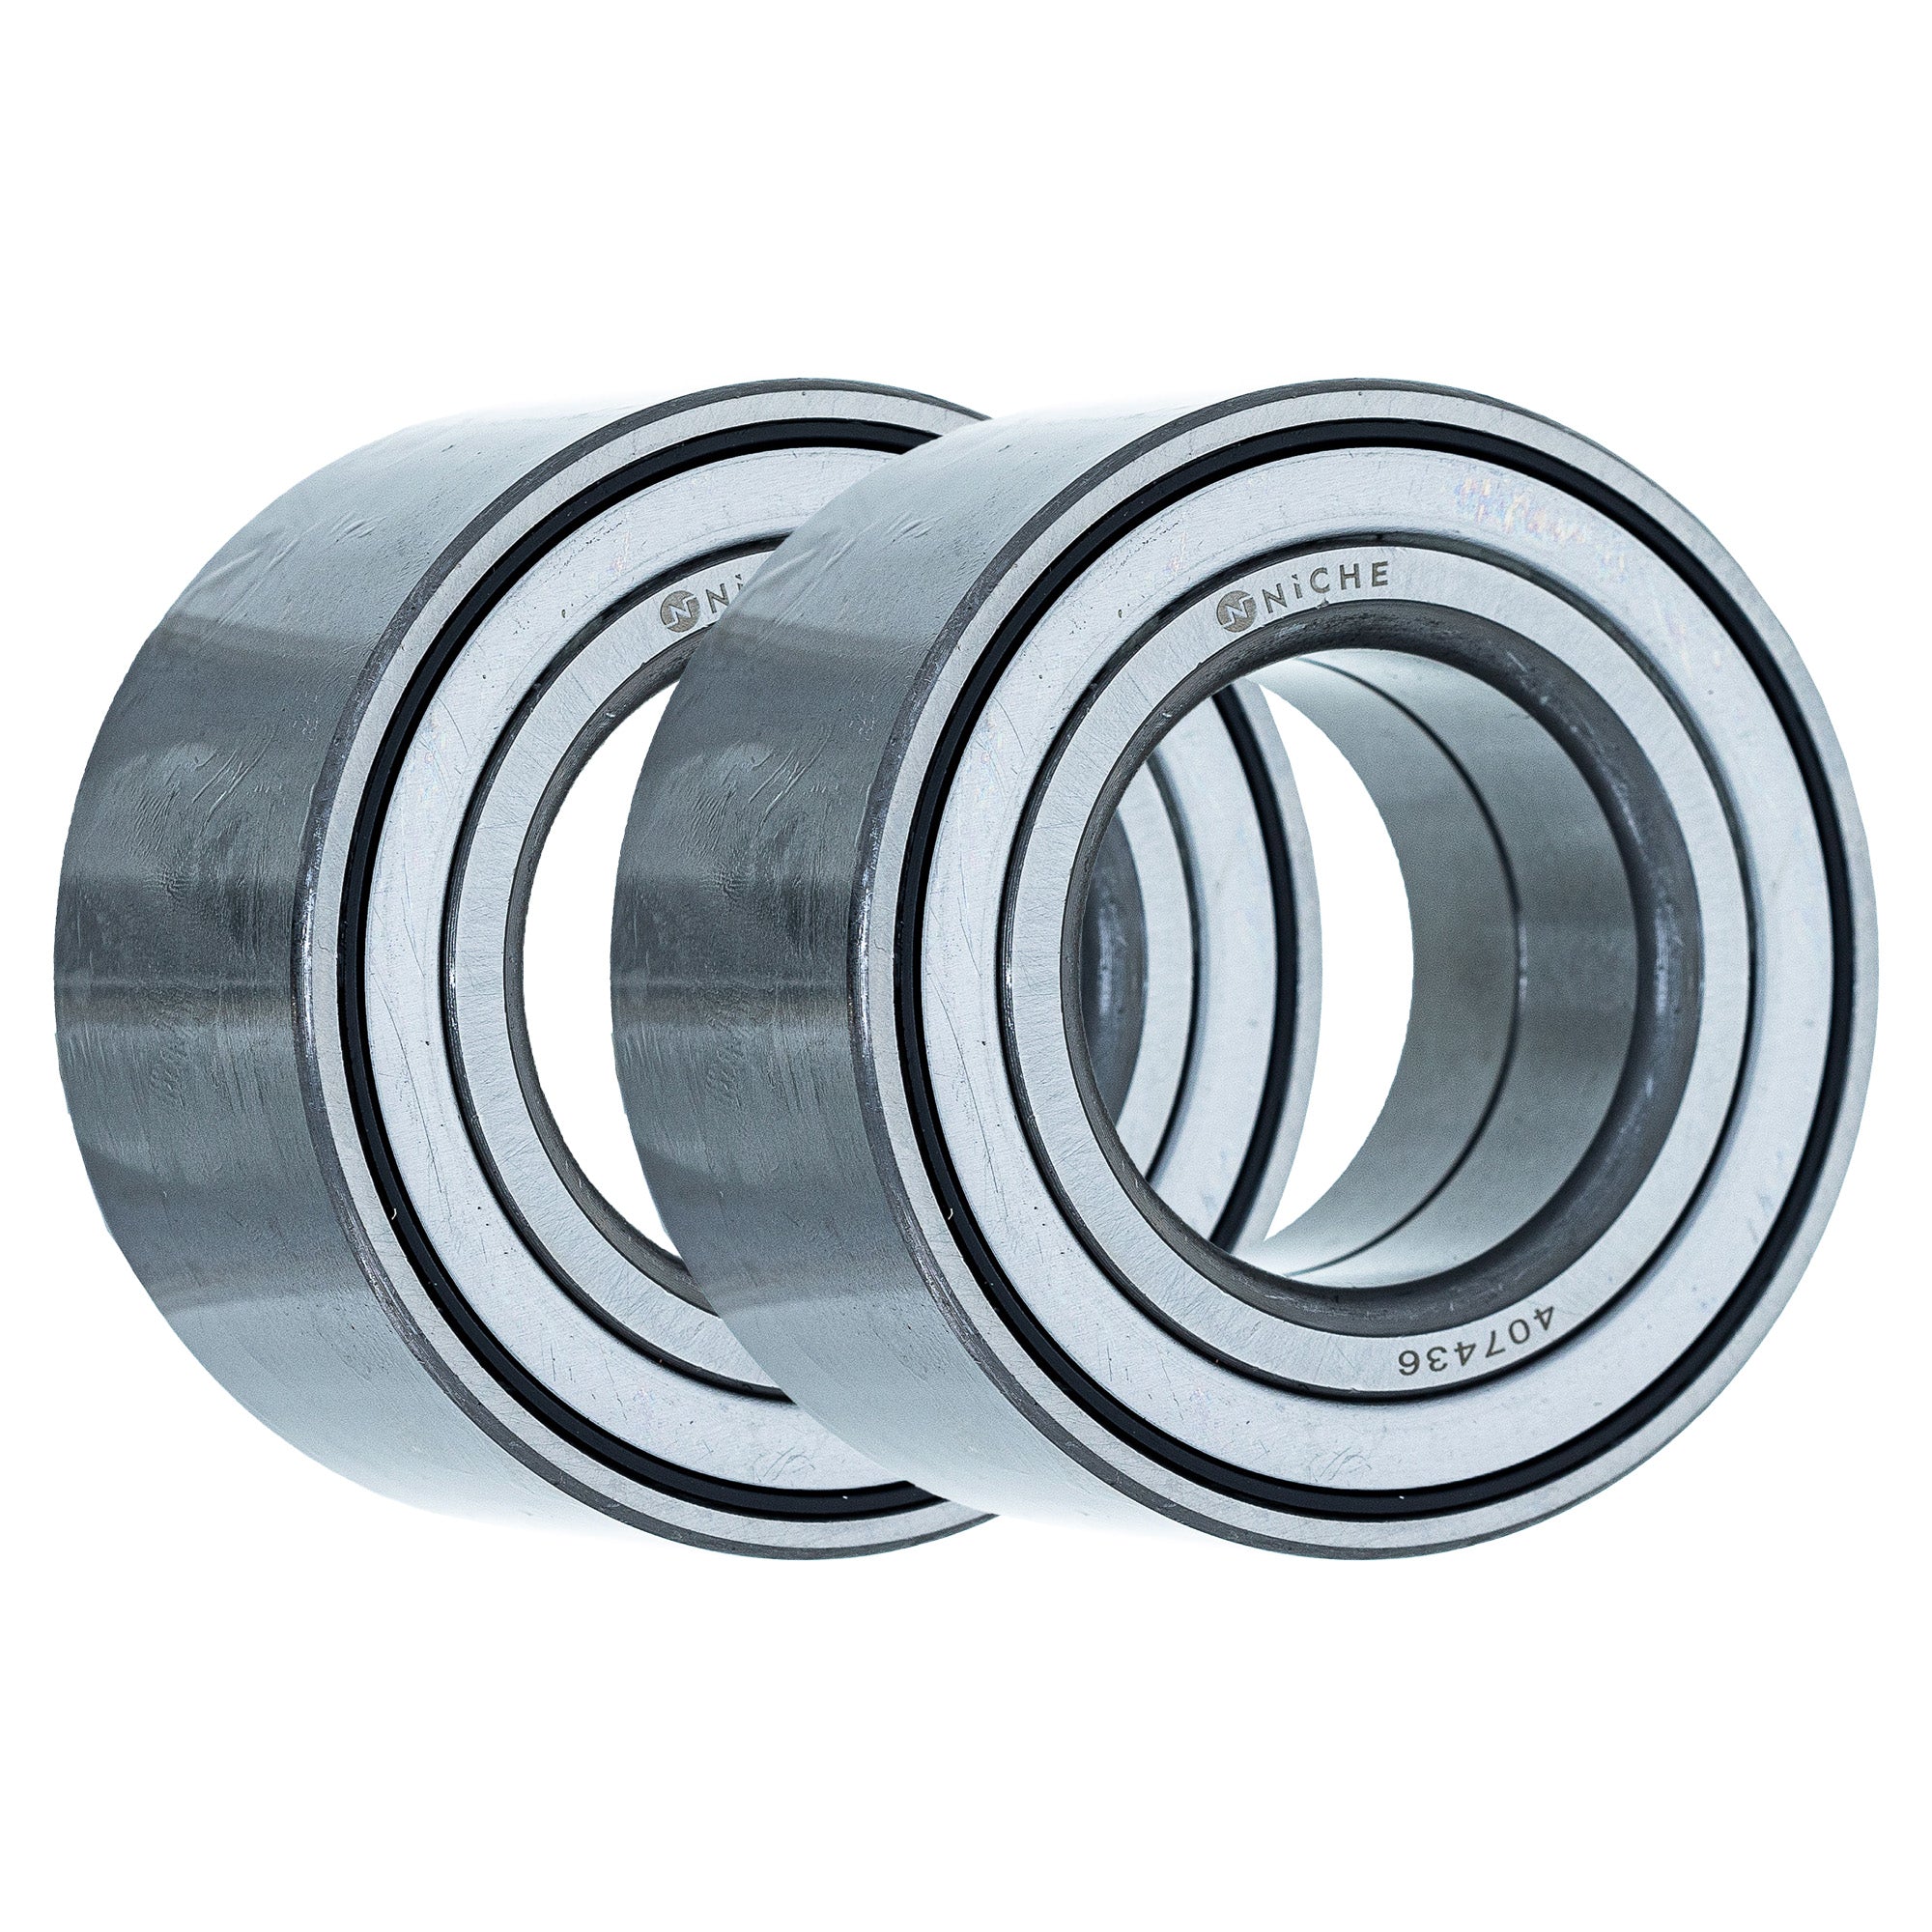 Double Row, Angular Contact, Ball Bearing Pack of 2 2-Pack for zOTHER NICHE 519-CBB2291R